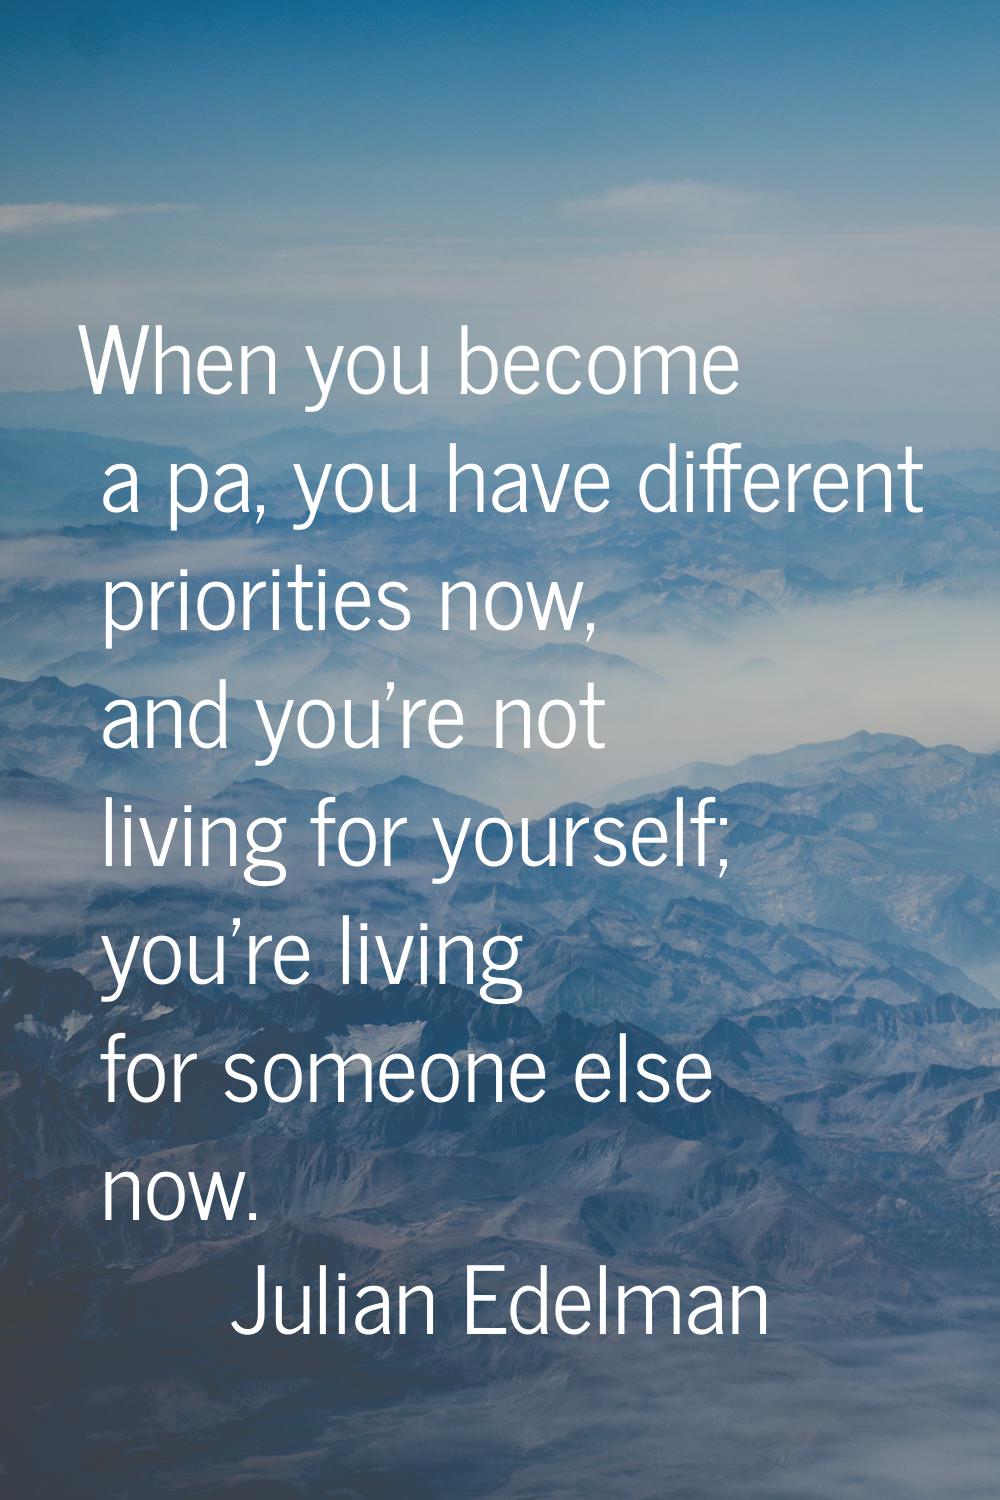 When you become a pa, you have different priorities now, and you're not living for yourself; you're